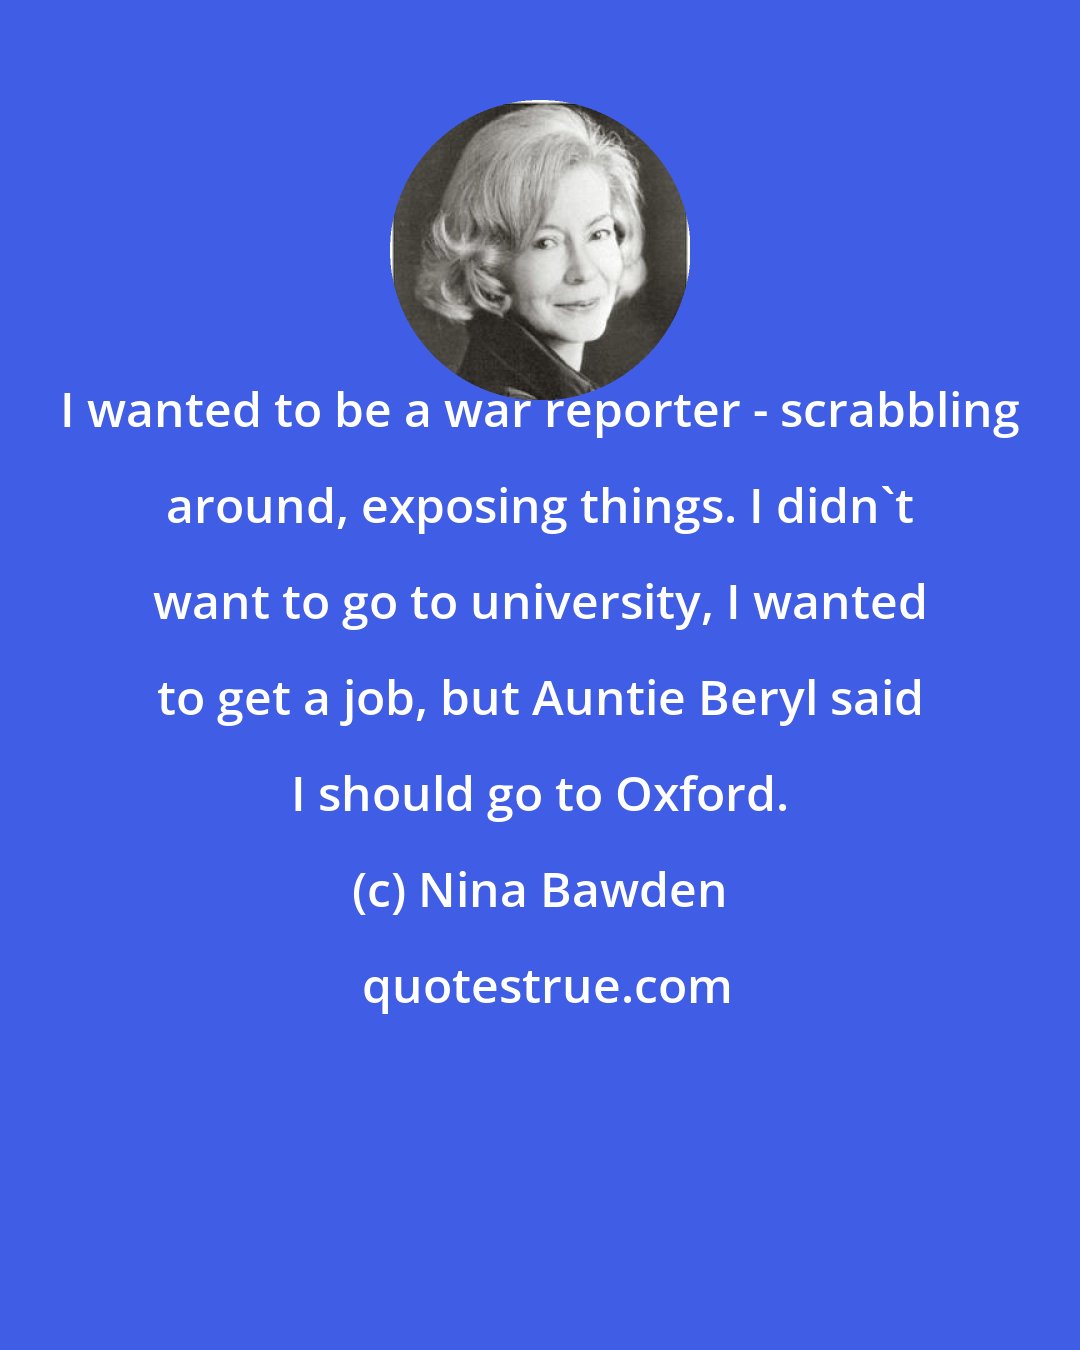 Nina Bawden: I wanted to be a war reporter - scrabbling around, exposing things. I didn't want to go to university, I wanted to get a job, but Auntie Beryl said I should go to Oxford.